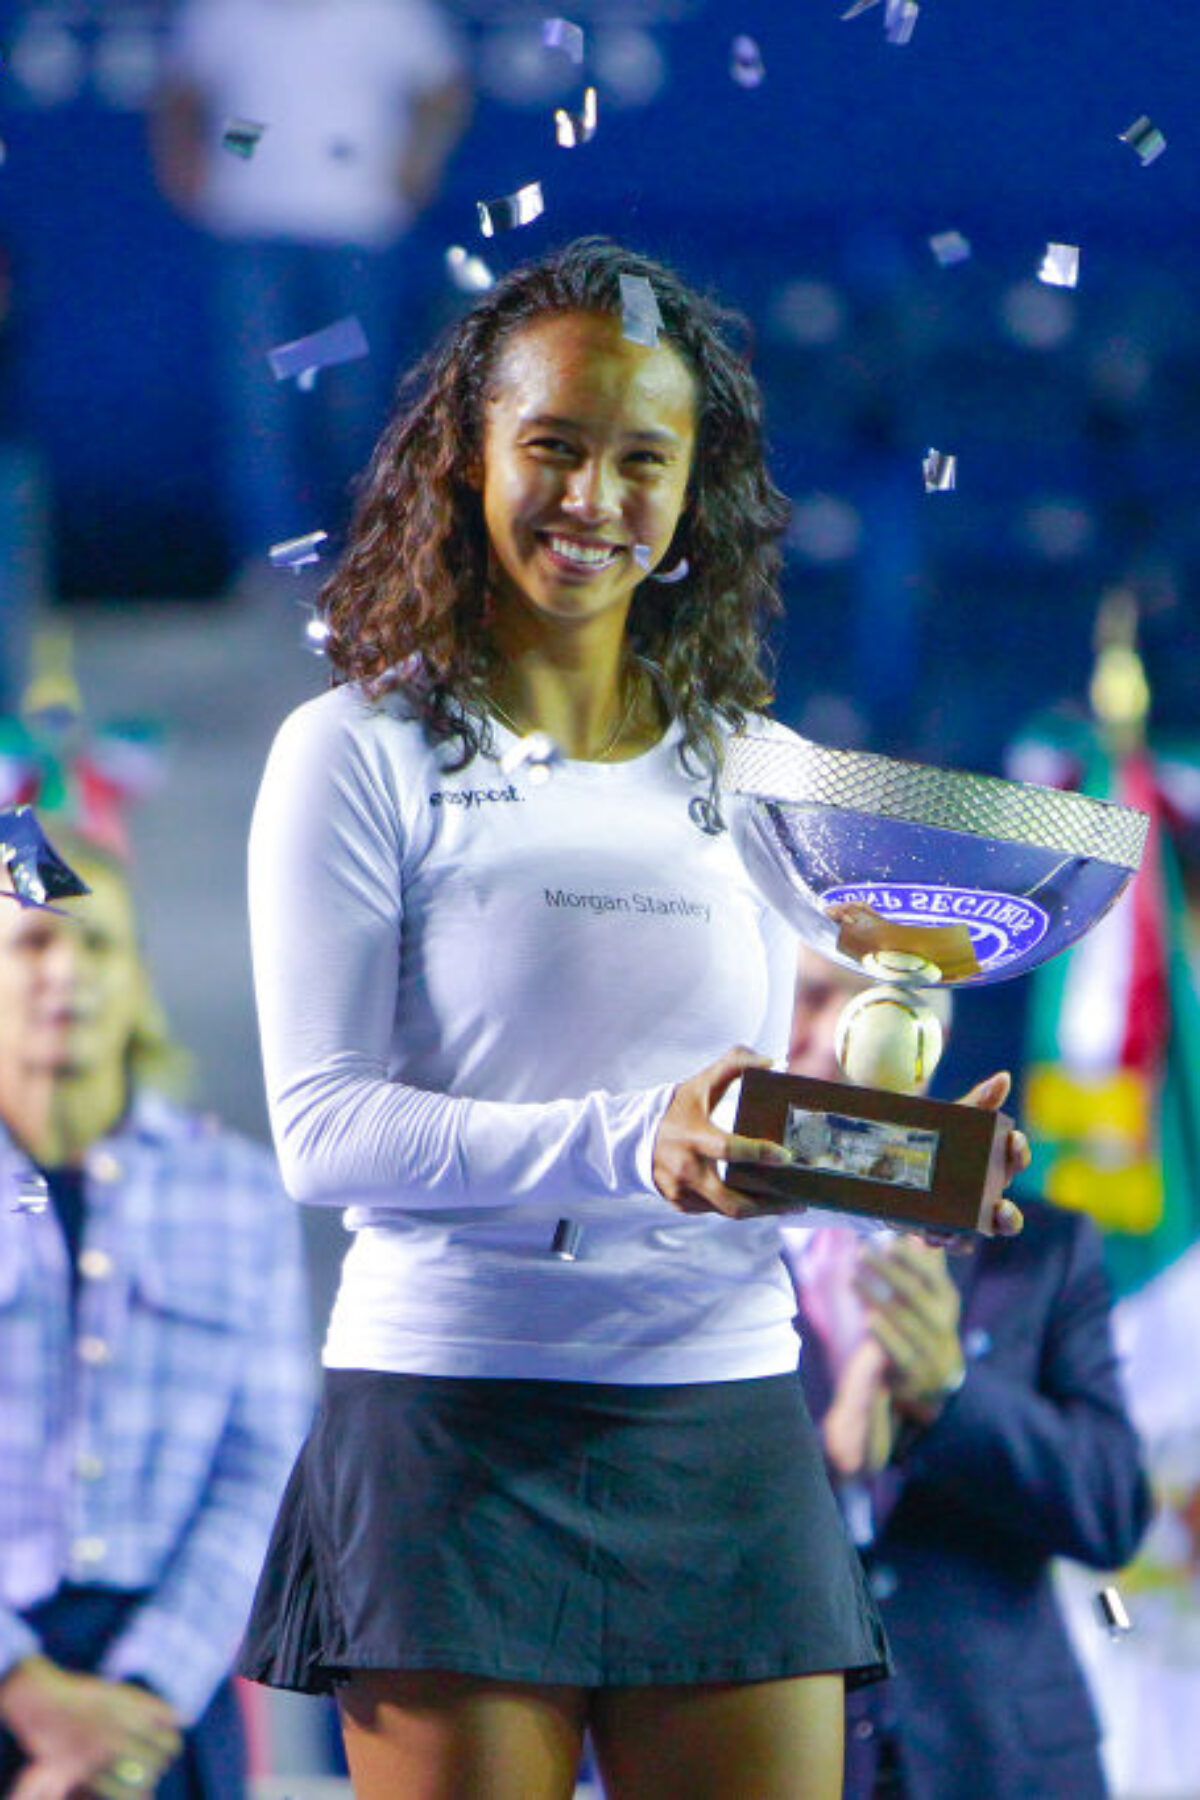 MONTERREY, MEXICO - MARCH 06: Leylah Fernandez of Canada celebrates with the champions trophy after winning the singles final match as part of the GNP Seguros WTA Monterrey Open 2022 Final on March 6, 2022 in Monterrey, Mexico. (Photo by Gonzalo Gonzalez/Jam Media/Getty Images)